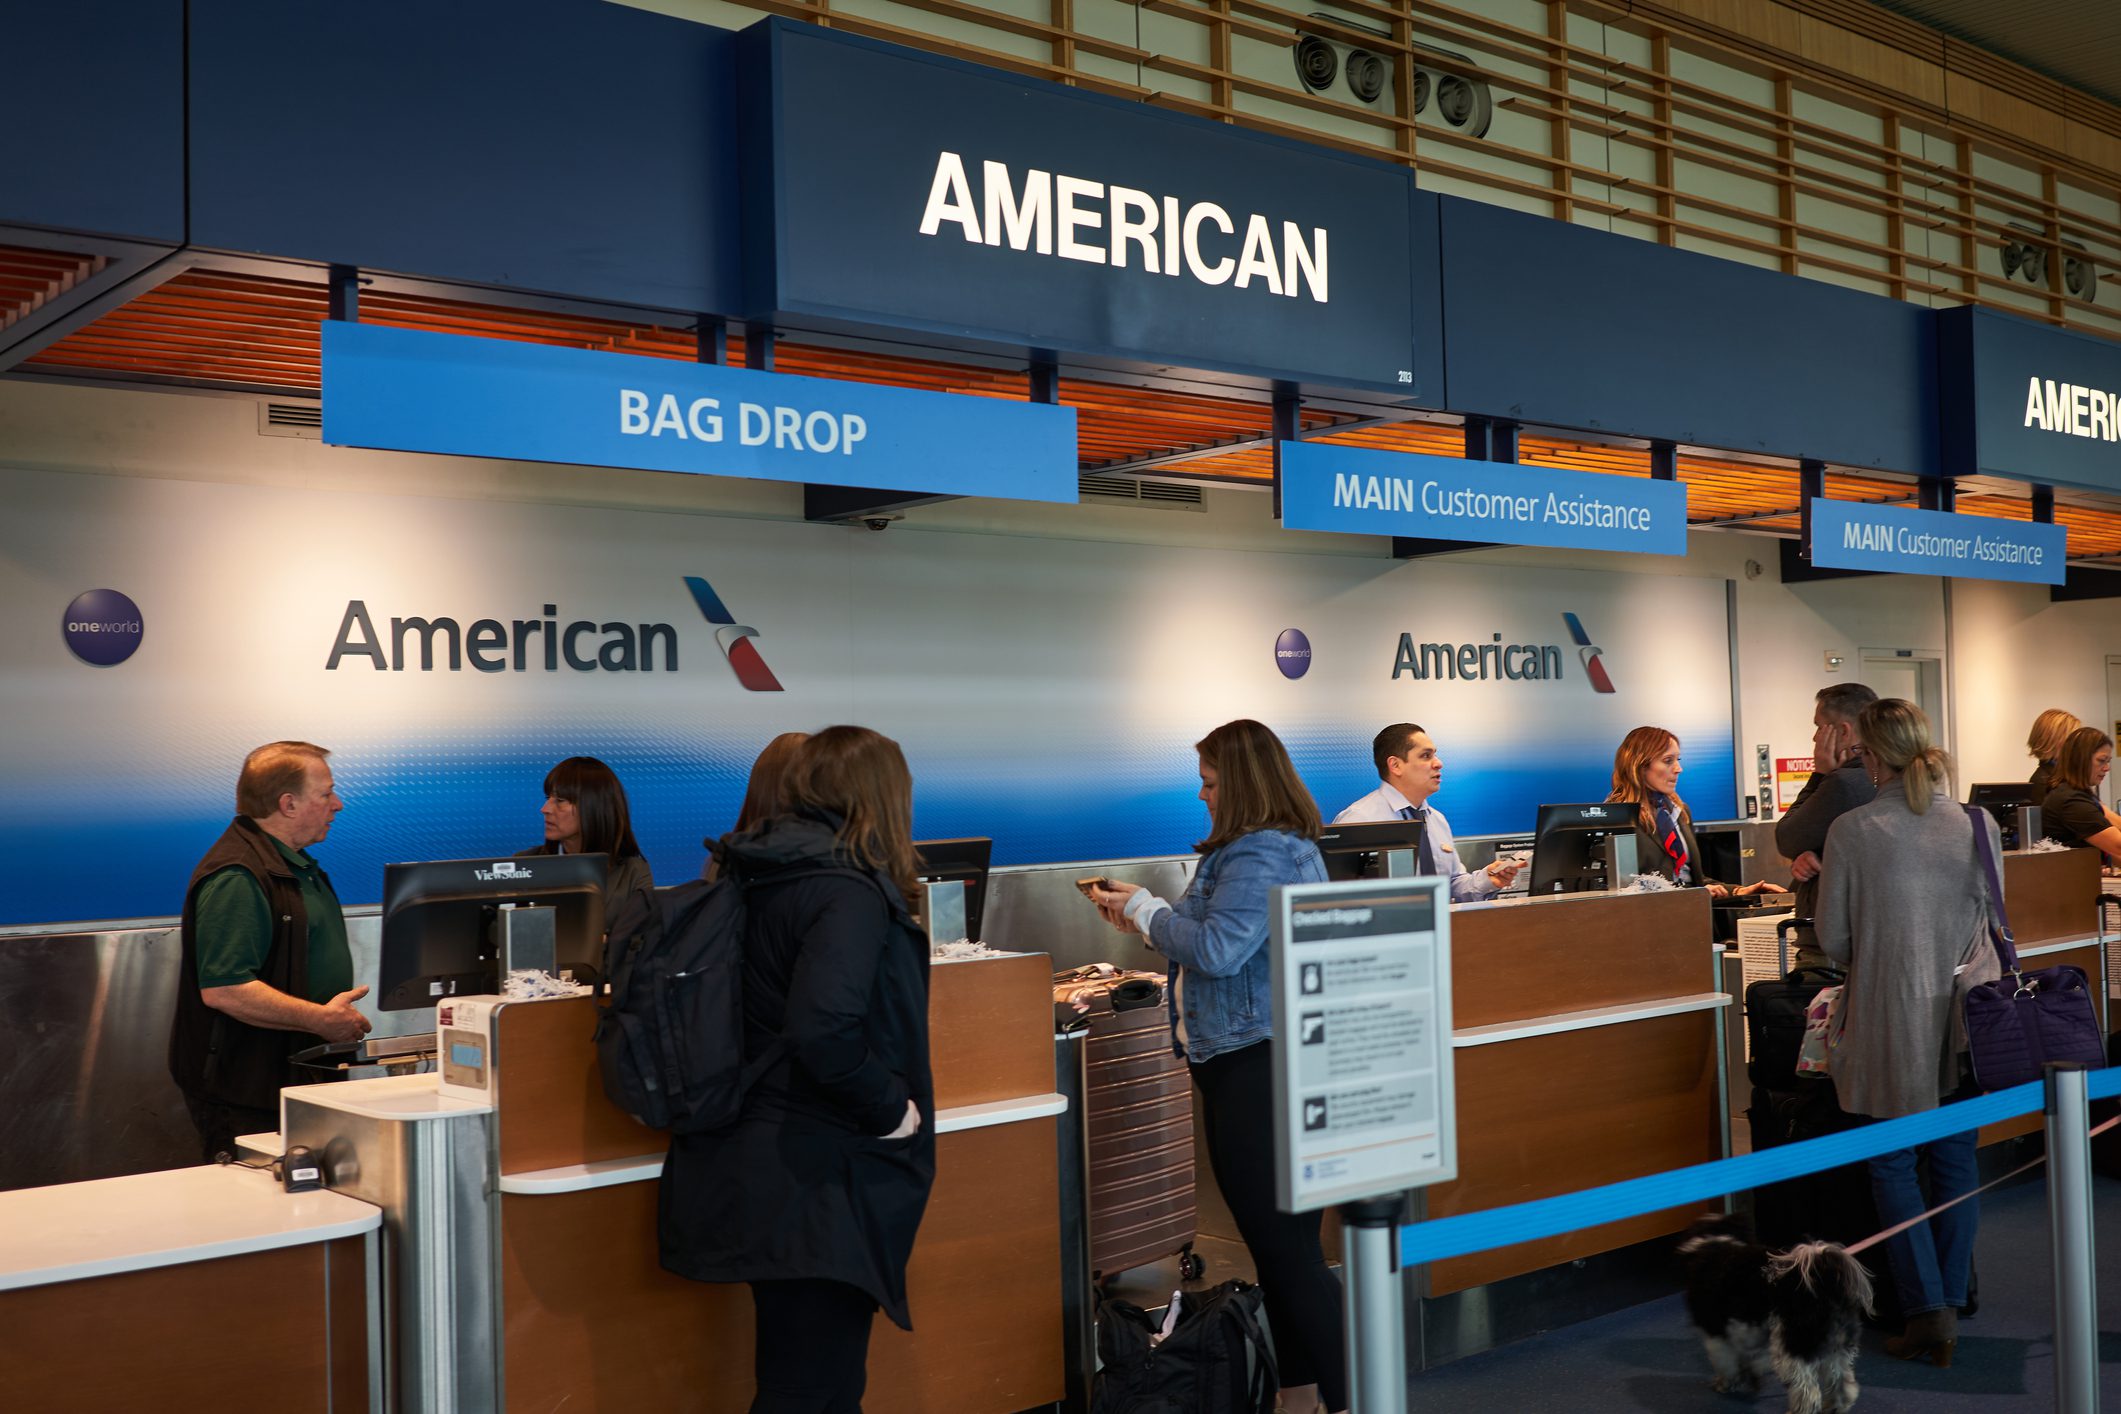 American Airlines Check-in Counter